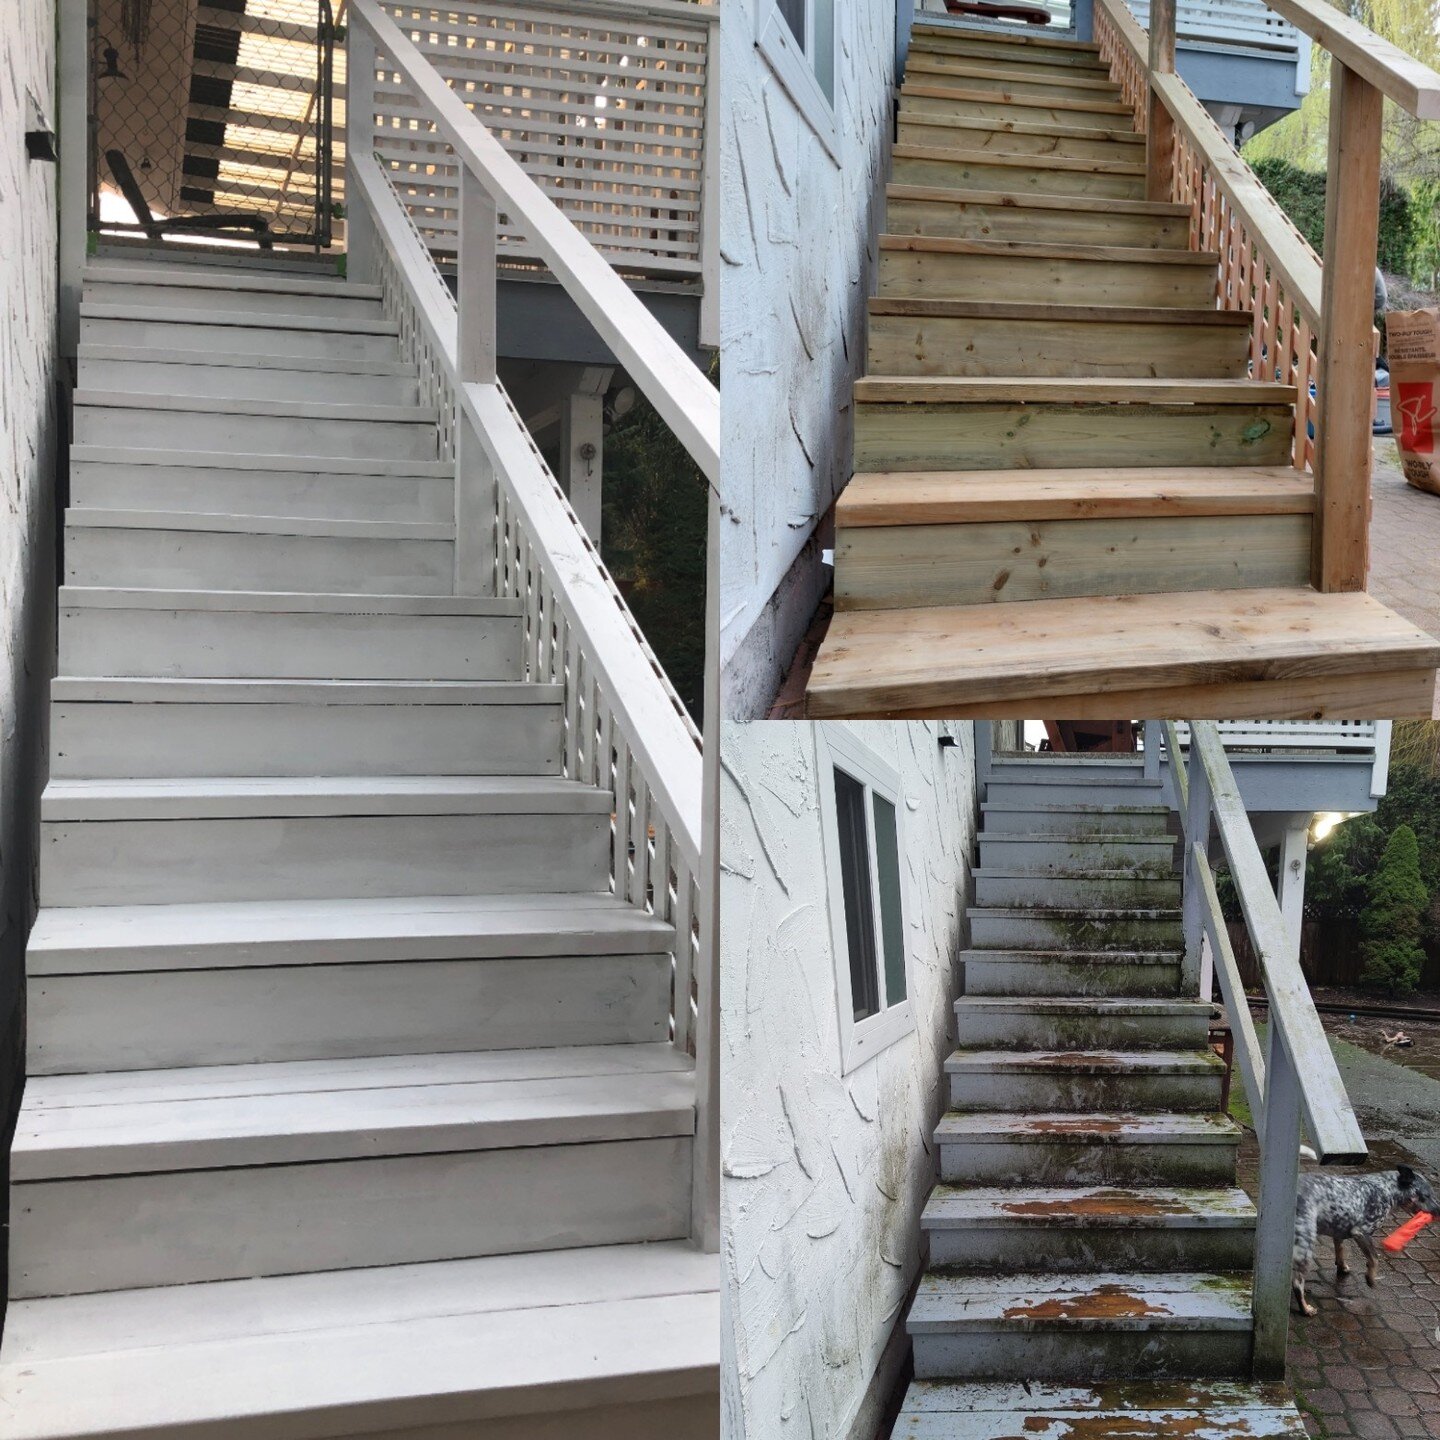 Custom Pressure treated Staircase replacement project. Old Staircase removed and replaced then painted as requested by our clients.